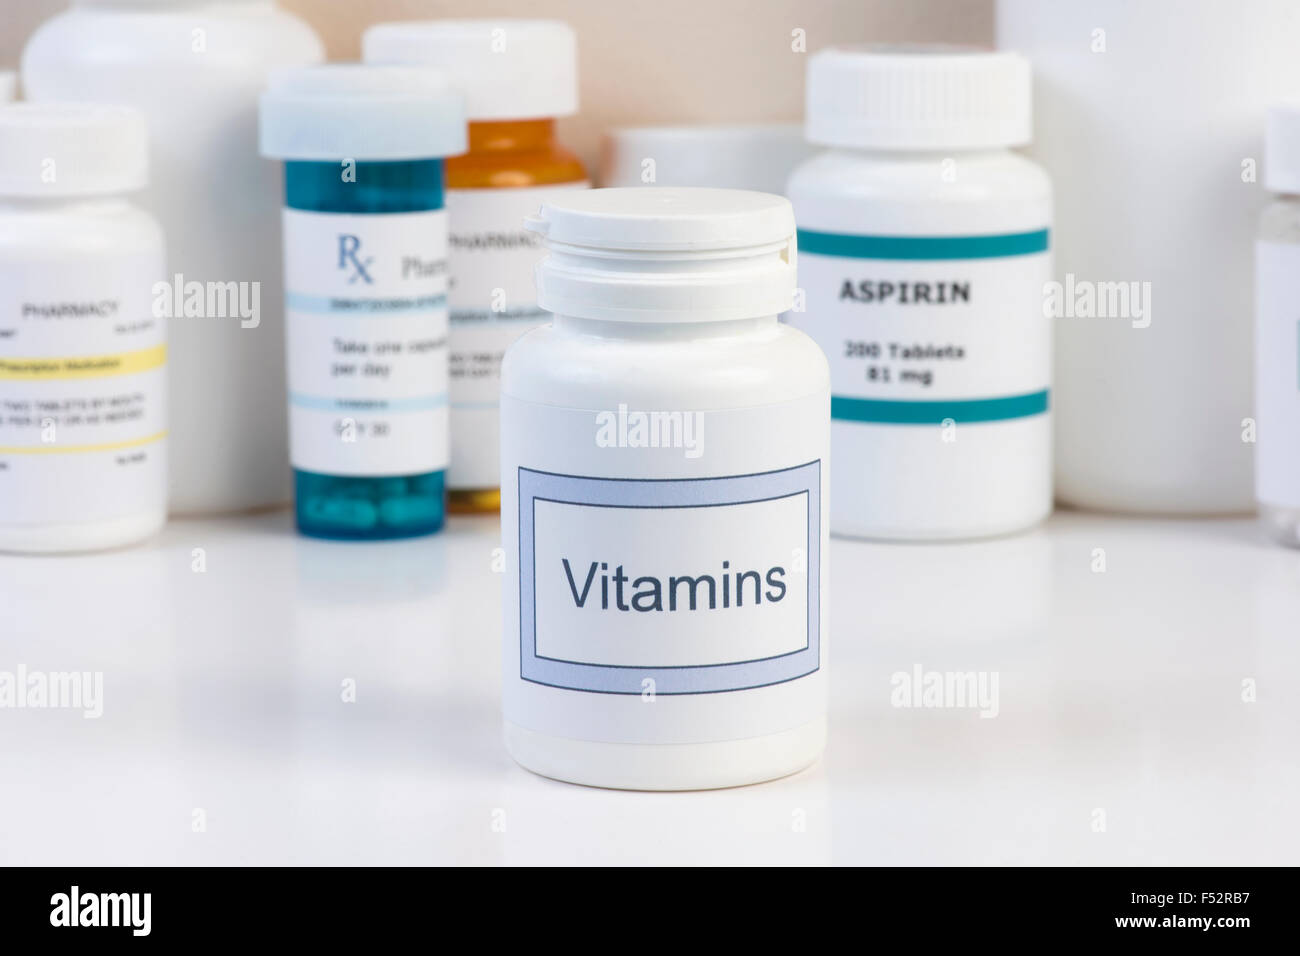 Vitamin bottle on counter top with prescription bottles in background. Stock Photo